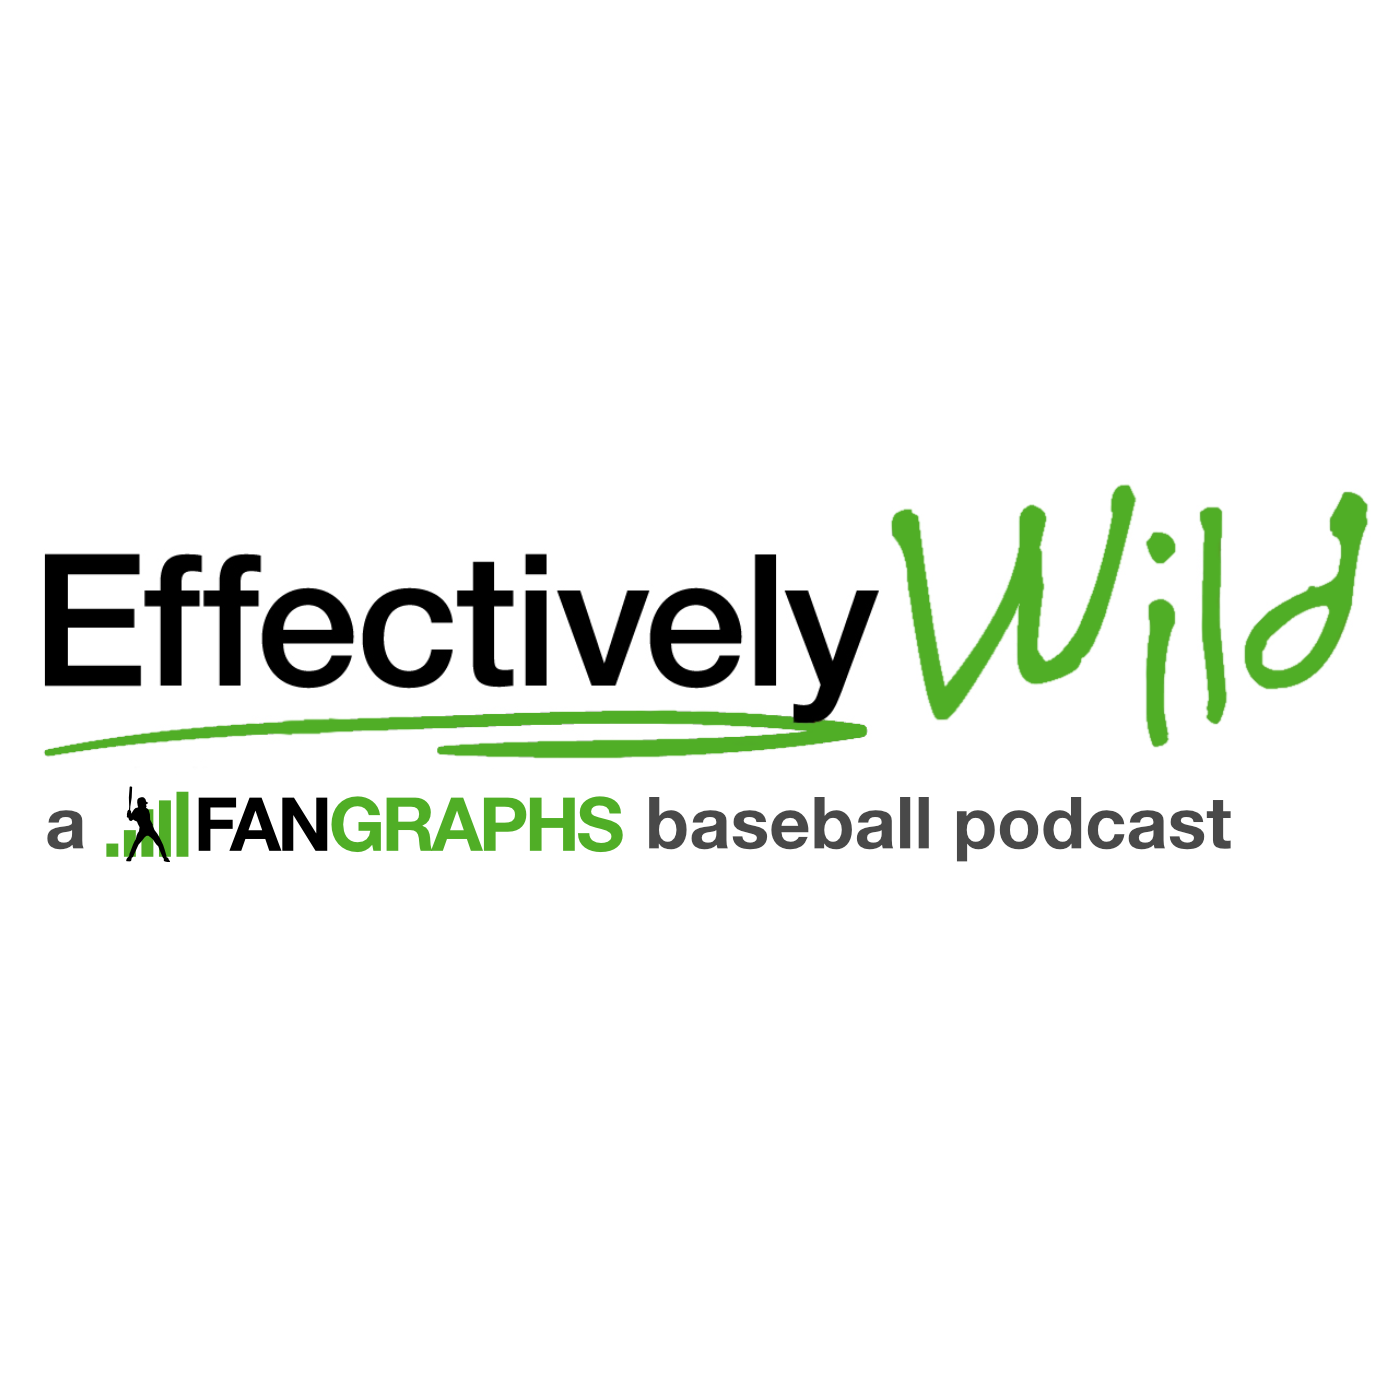 A highlight from Effectively Wild Episode 1990: Week 1 Non-Overreactions